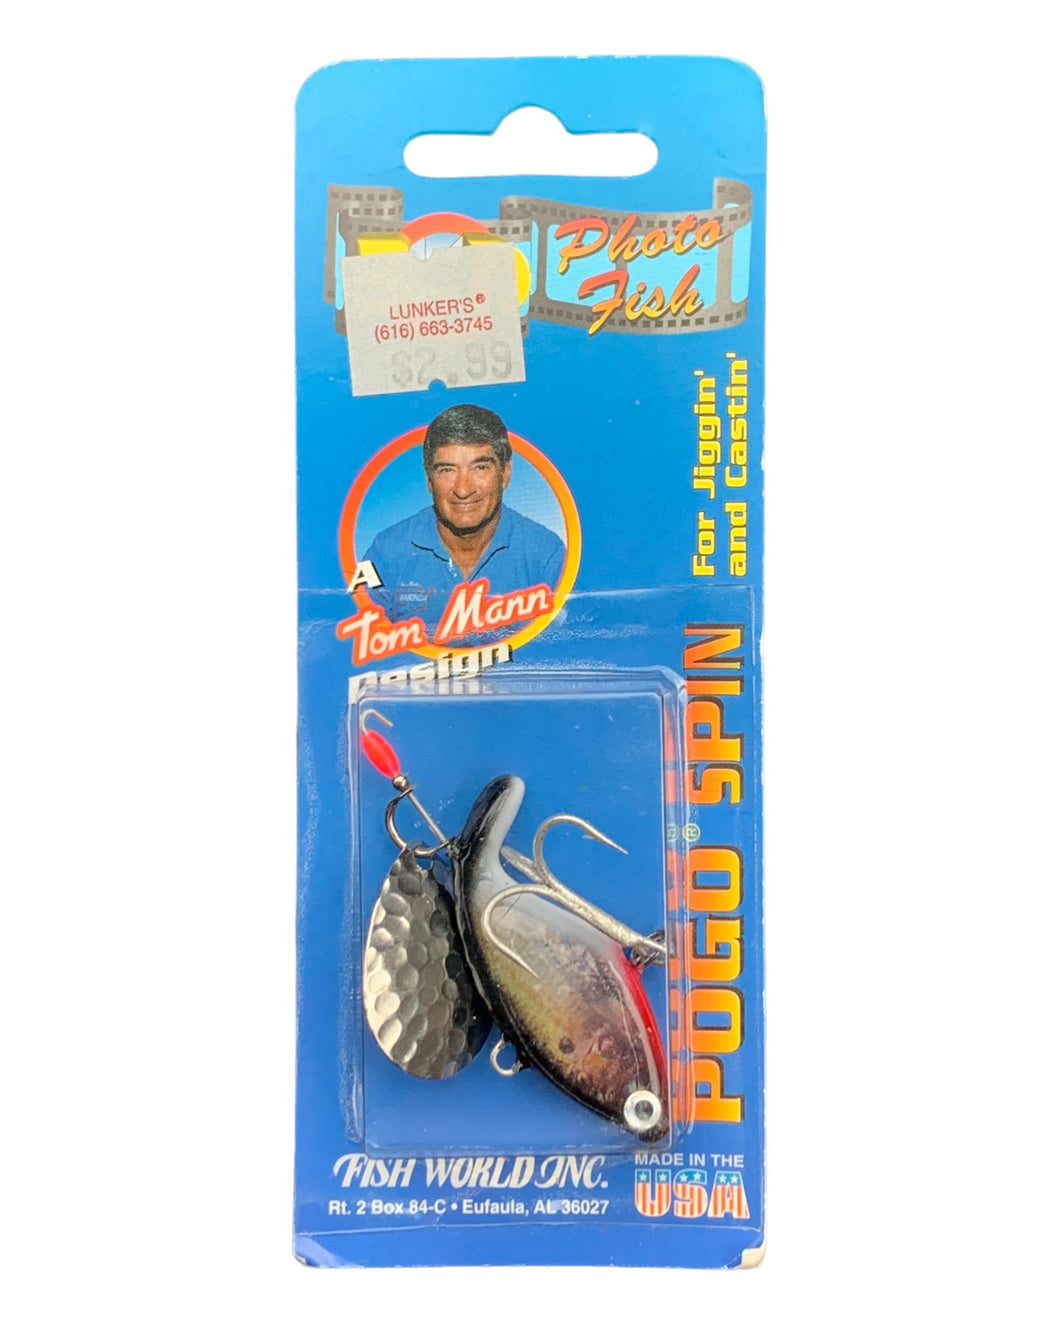 Tom Mann Fish World Inc. POGO SPIN Fishing Lure Front Package View